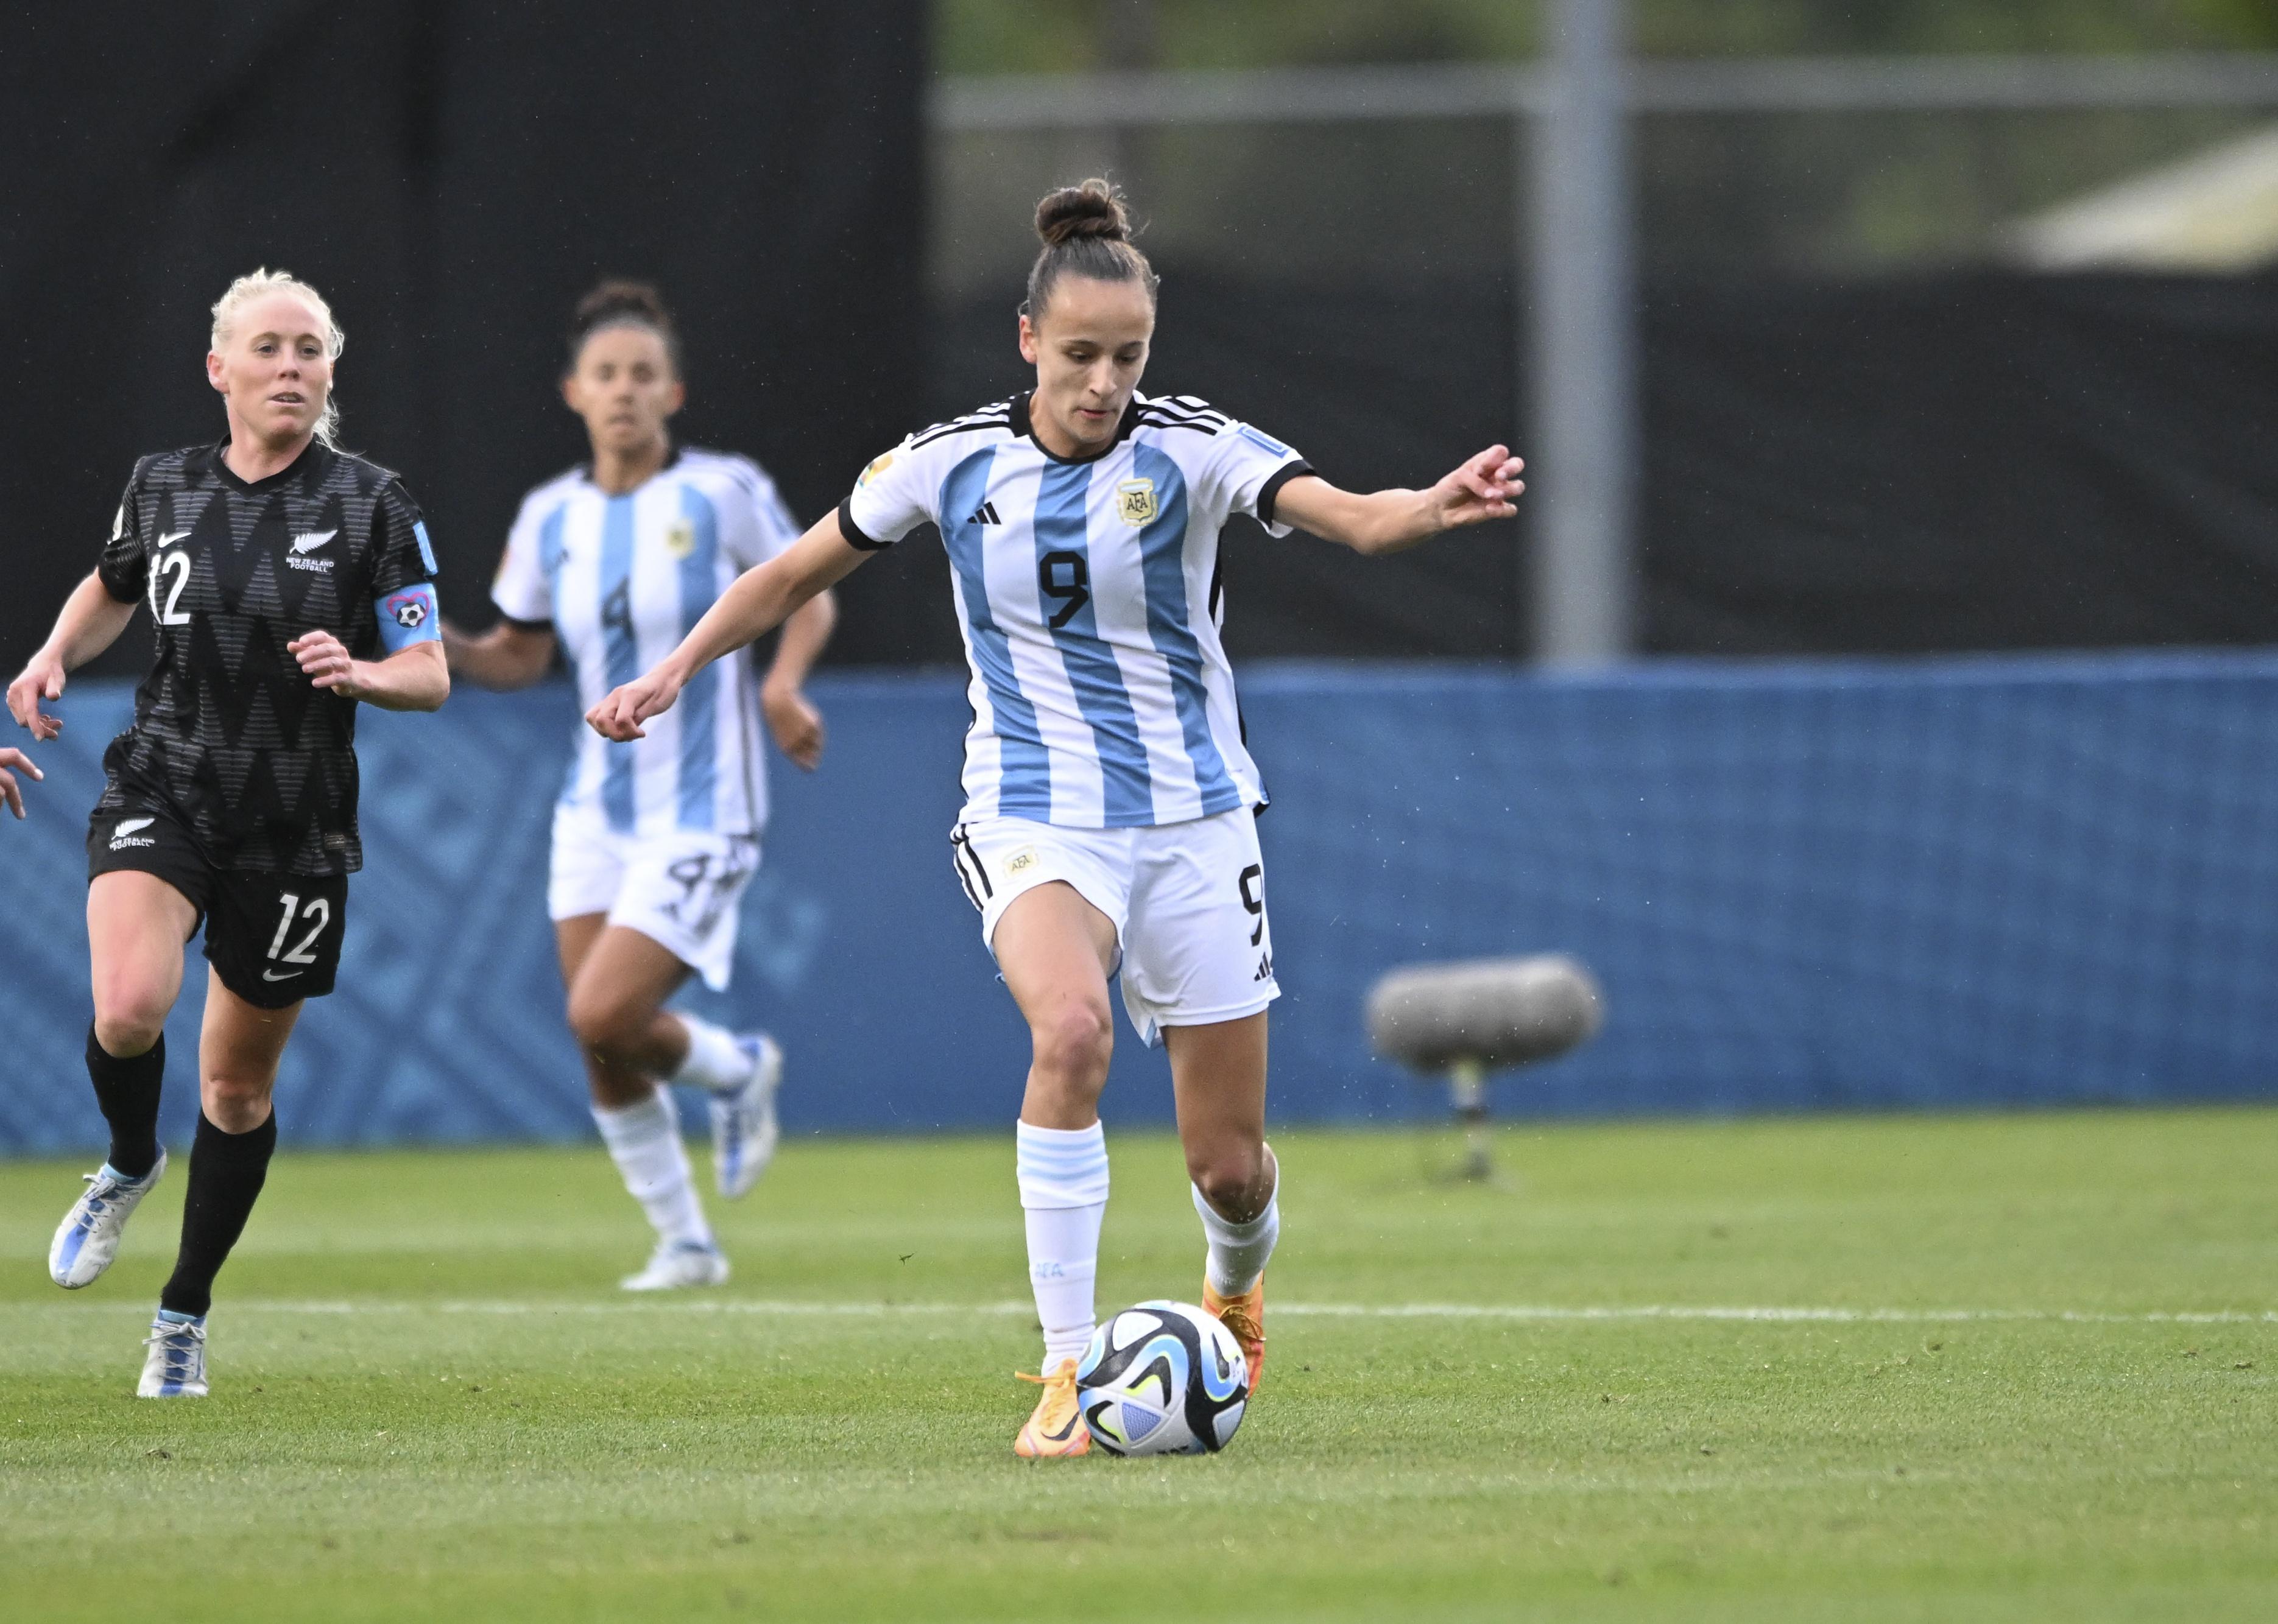 Paulina Gramaglia of Argentina National Women's soccer team in action during the FIFA Women's World Cup 2023 friendly game.